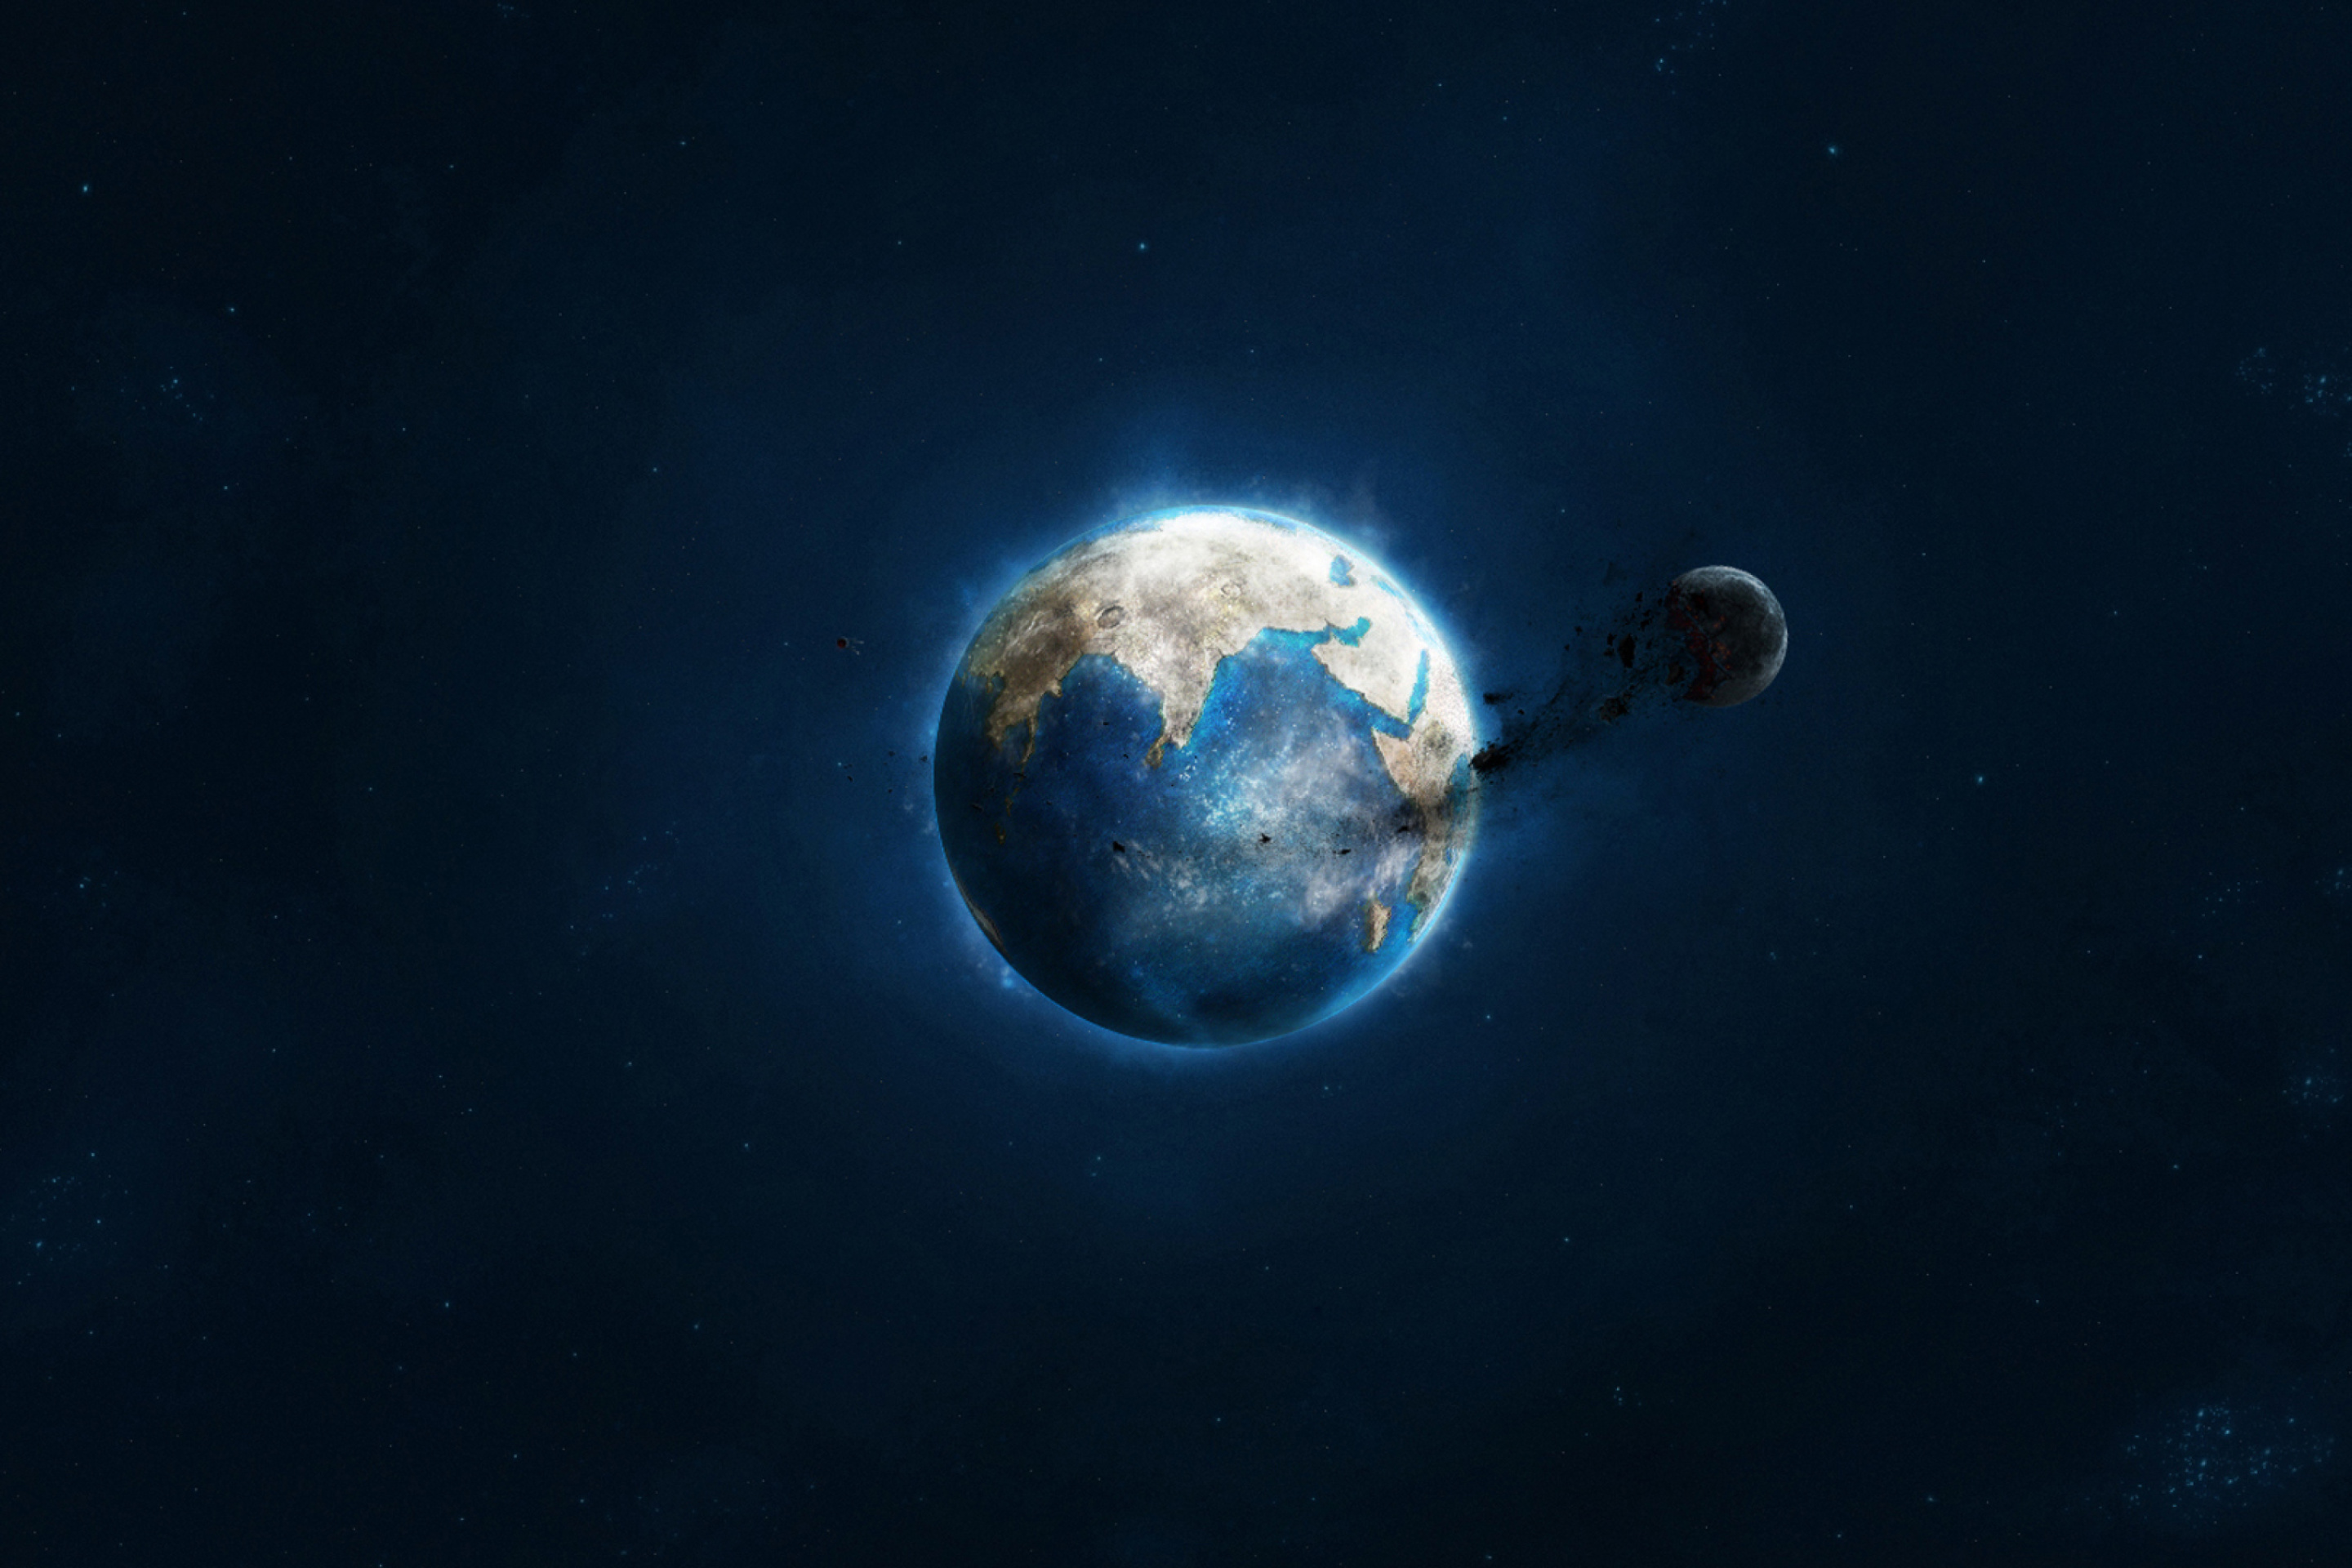 Planet and Asteroid wallpaper 2880x1920